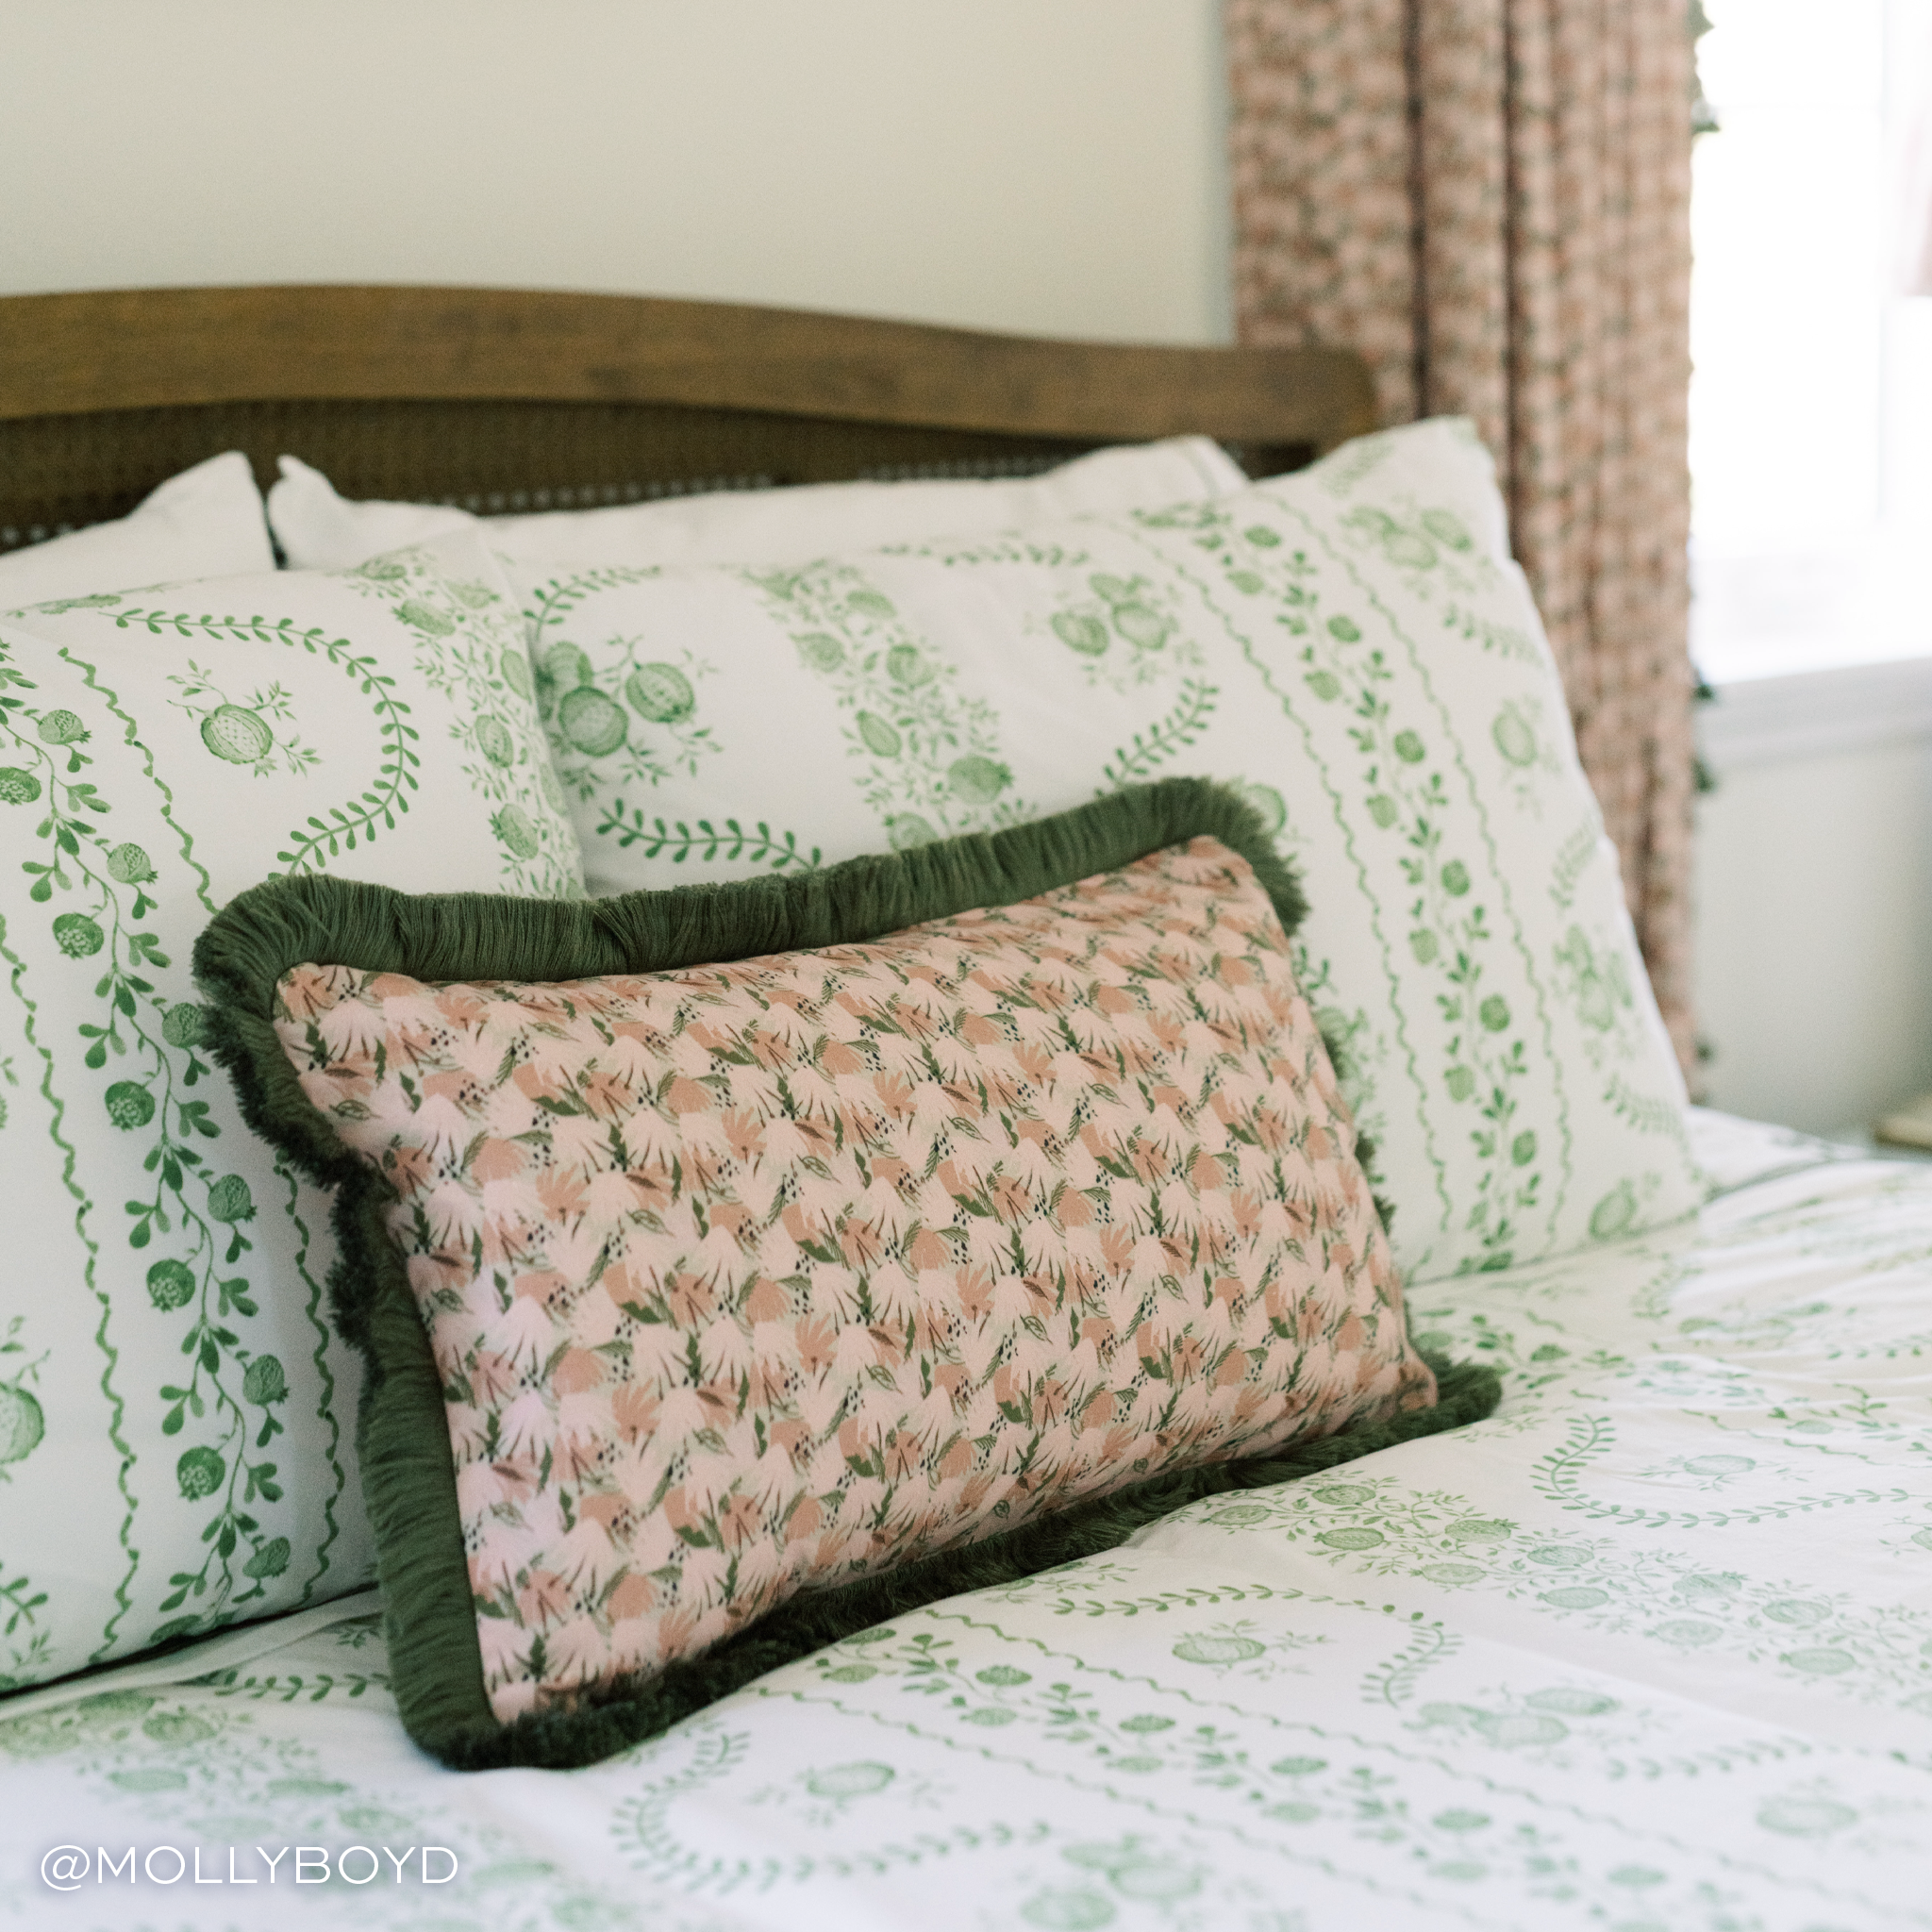 pink and green floral pillow with green fringe trim laying on green and white floral bedding